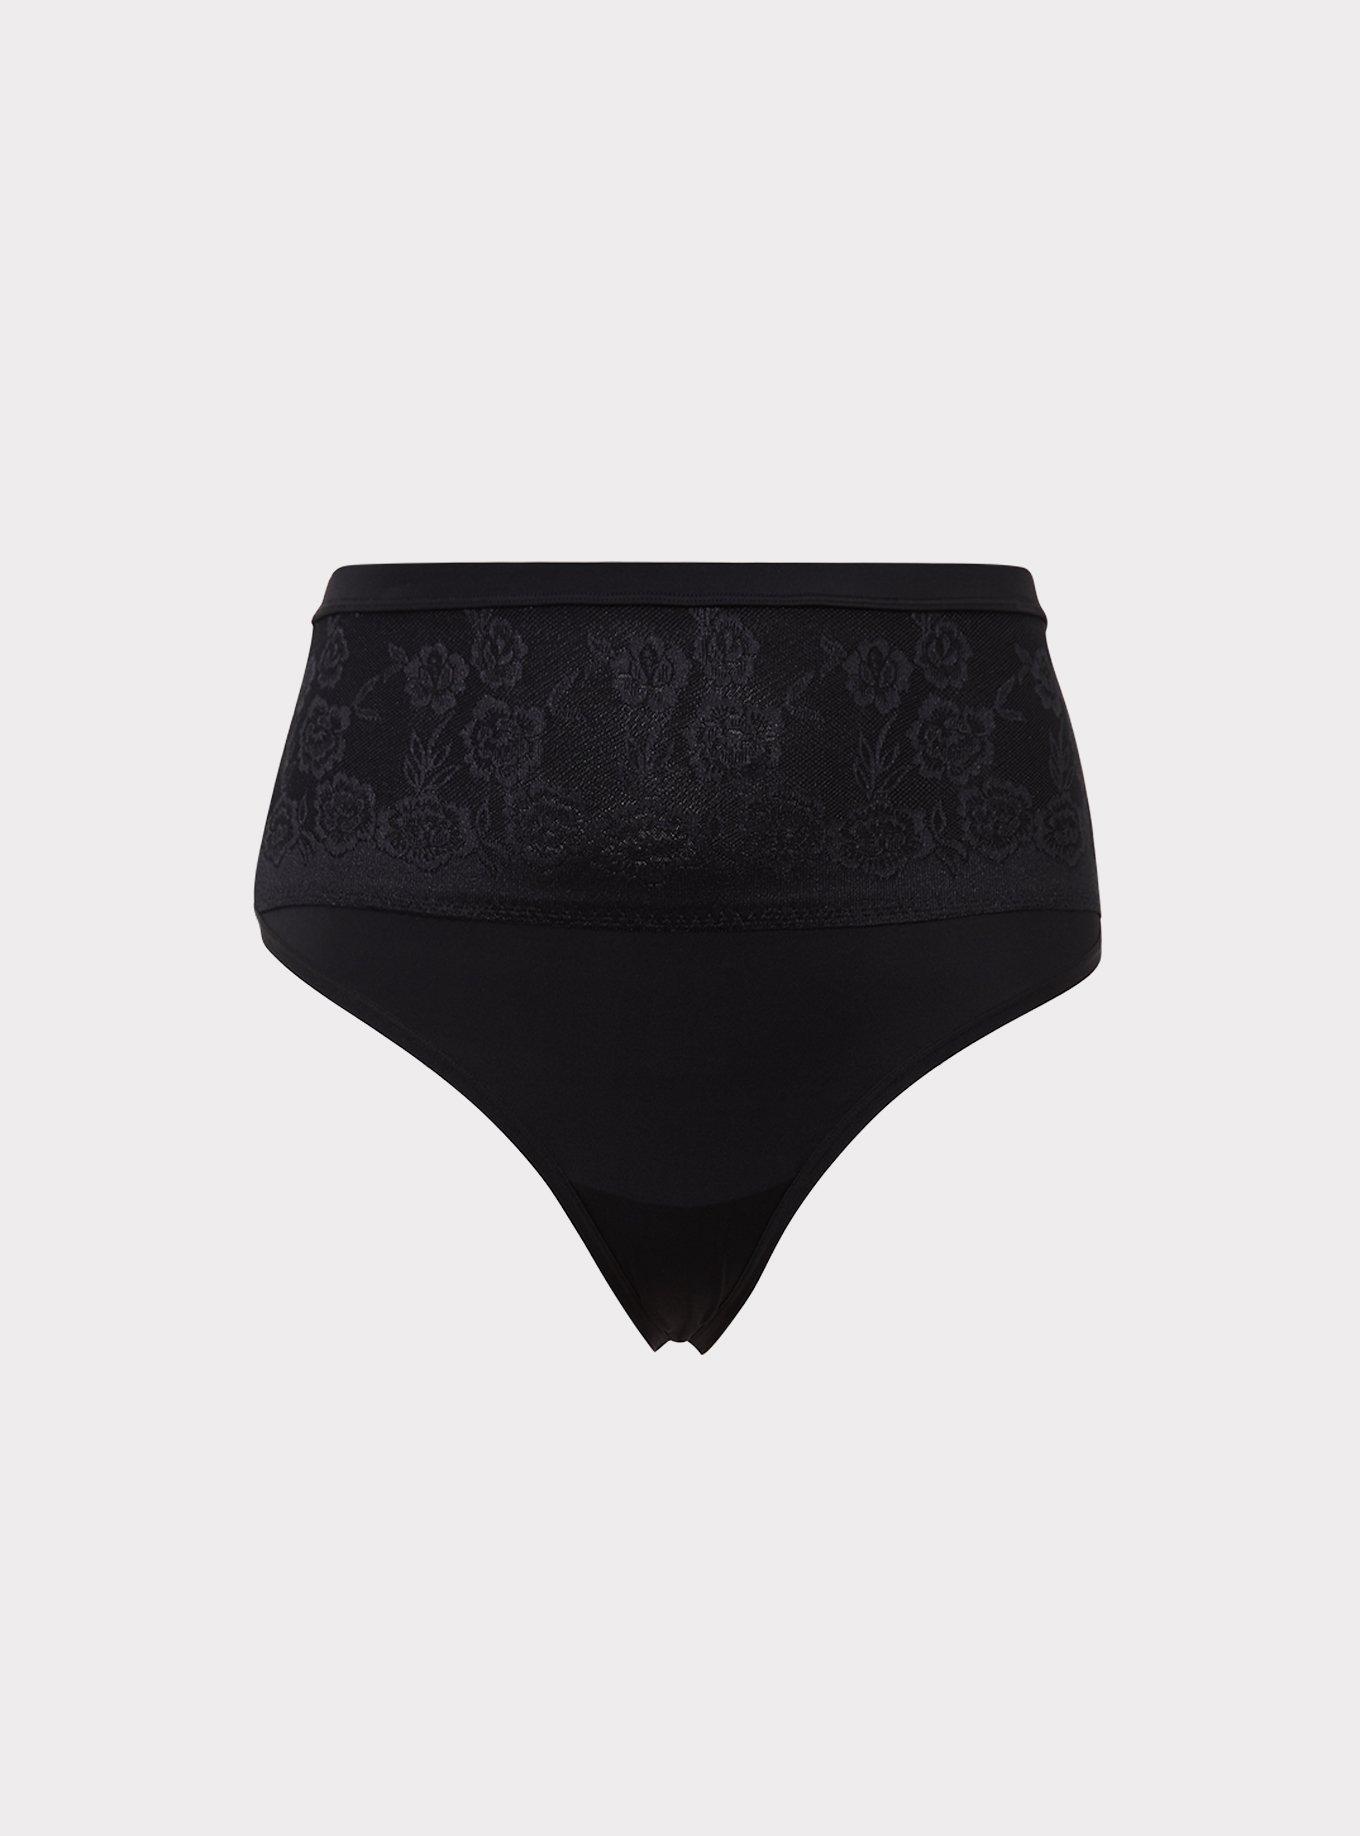 Microfiber and Lace Thong Panty - Black